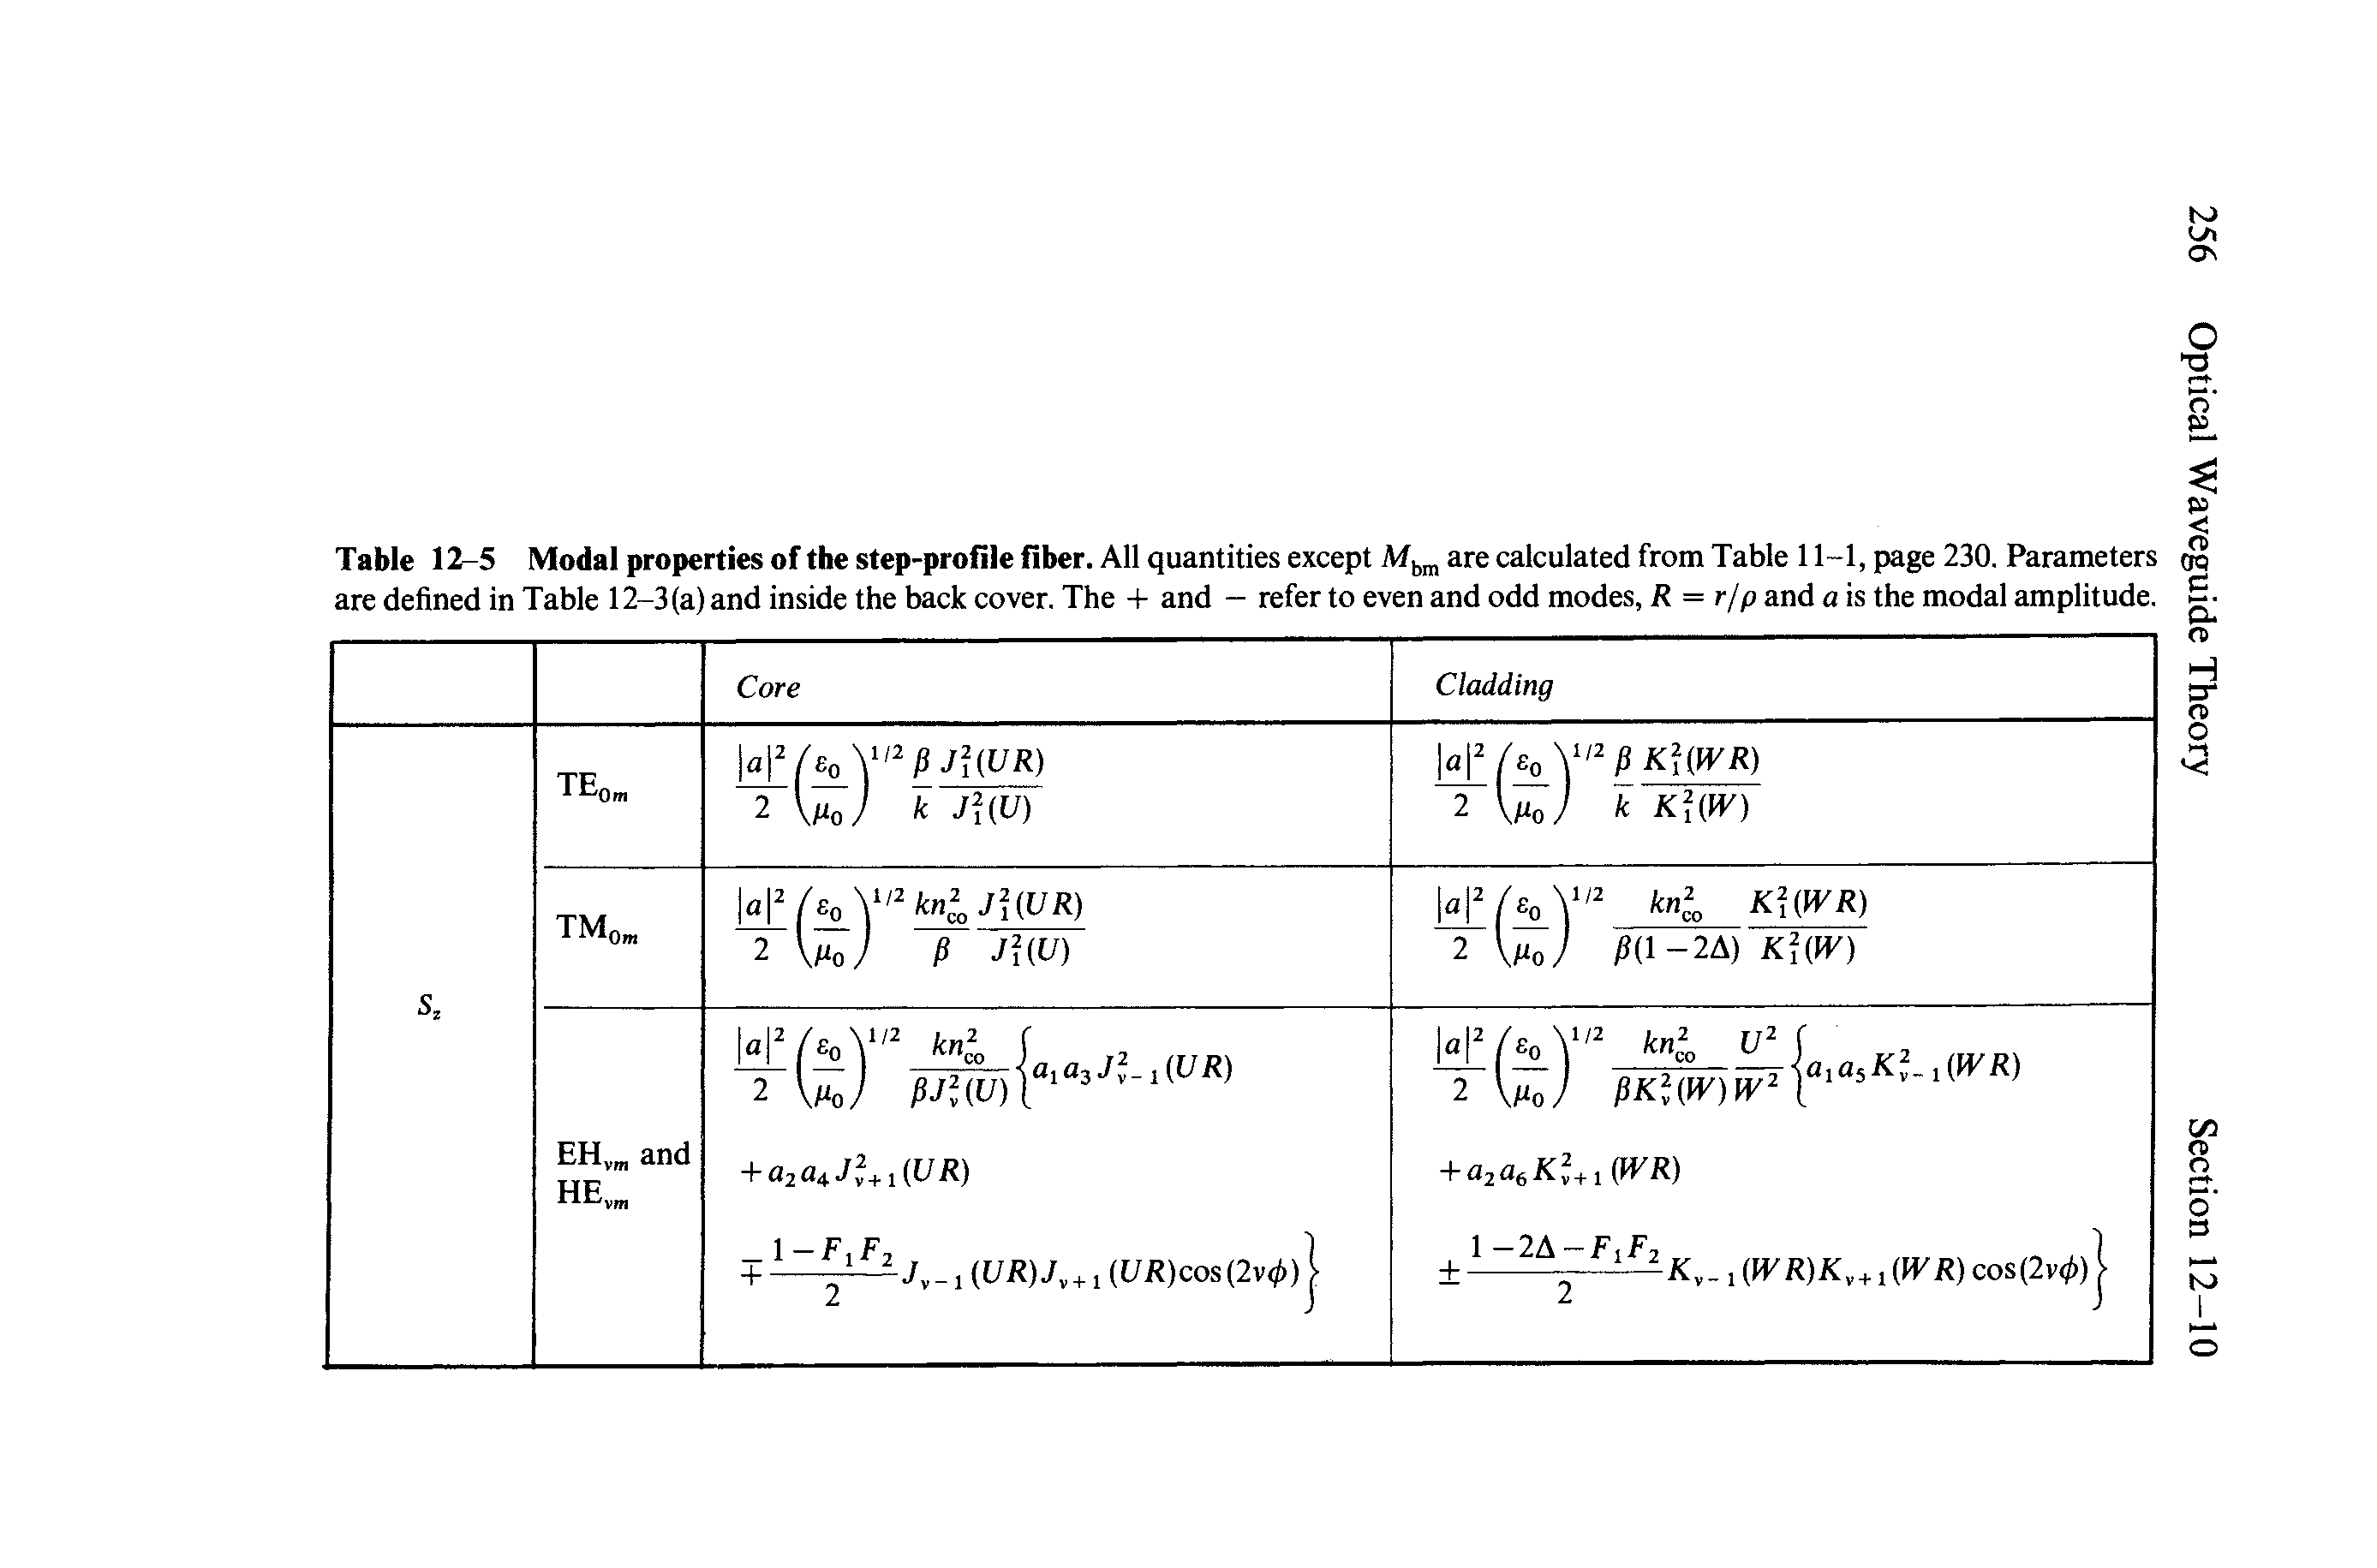 Table 12-5 Modal properties of the step-profile fiber. All quantities except are calculated from Table 11-1, page 230, Parameters are defined in Table 12-3 (a) and inside the back cover. The + and - refer to even and odd modes, R = rjp and a is the modal amplitude.